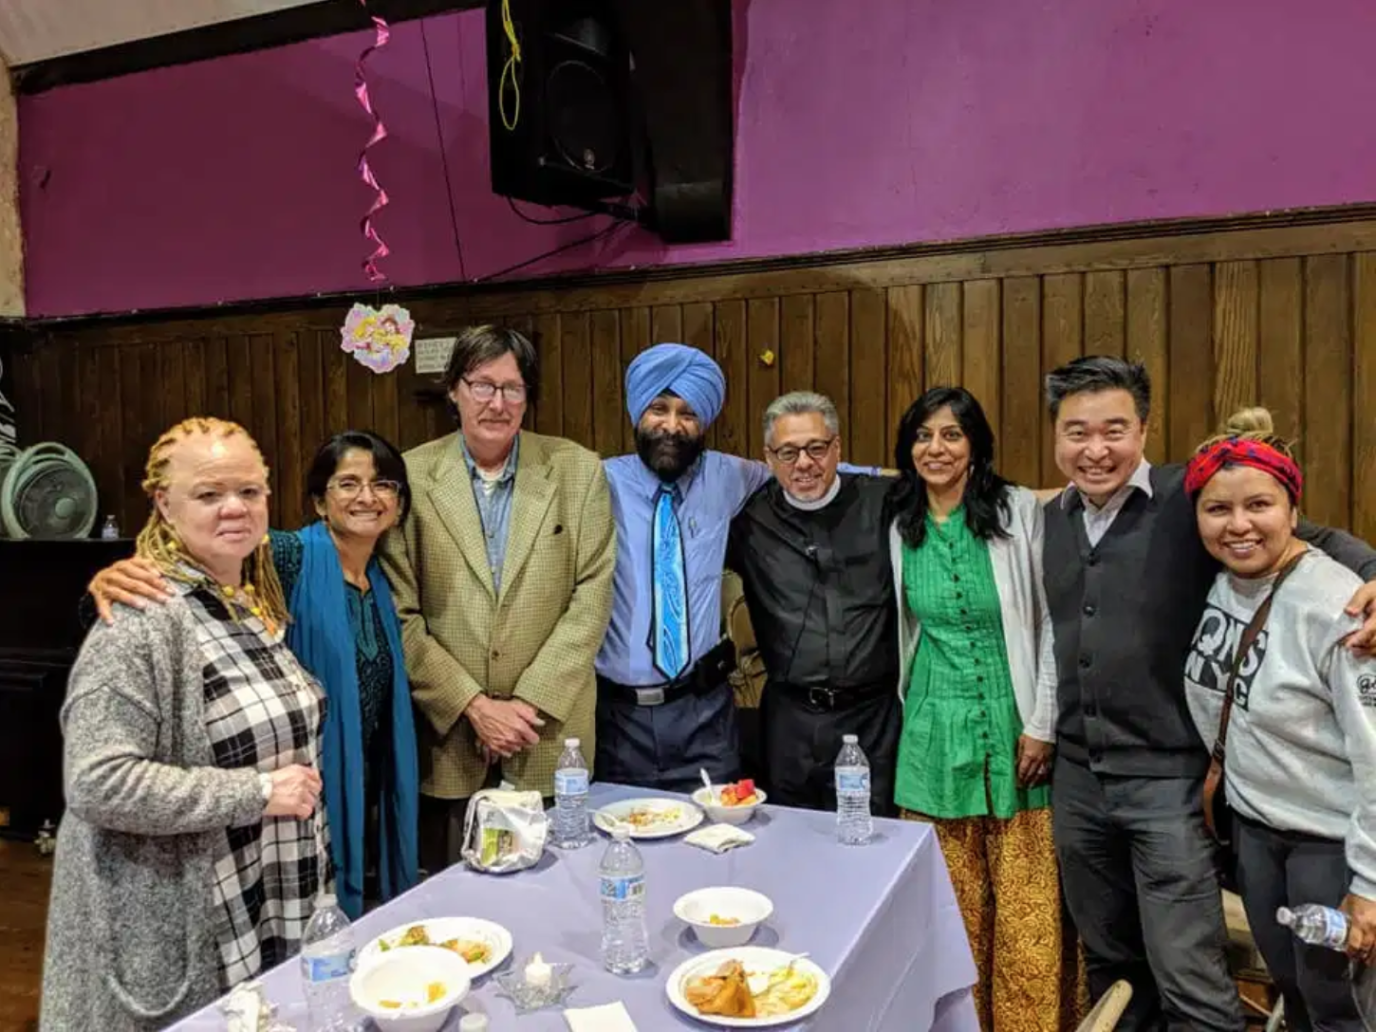 Flushing Interfaith Council receives $20,000 grant to support community relief efforts